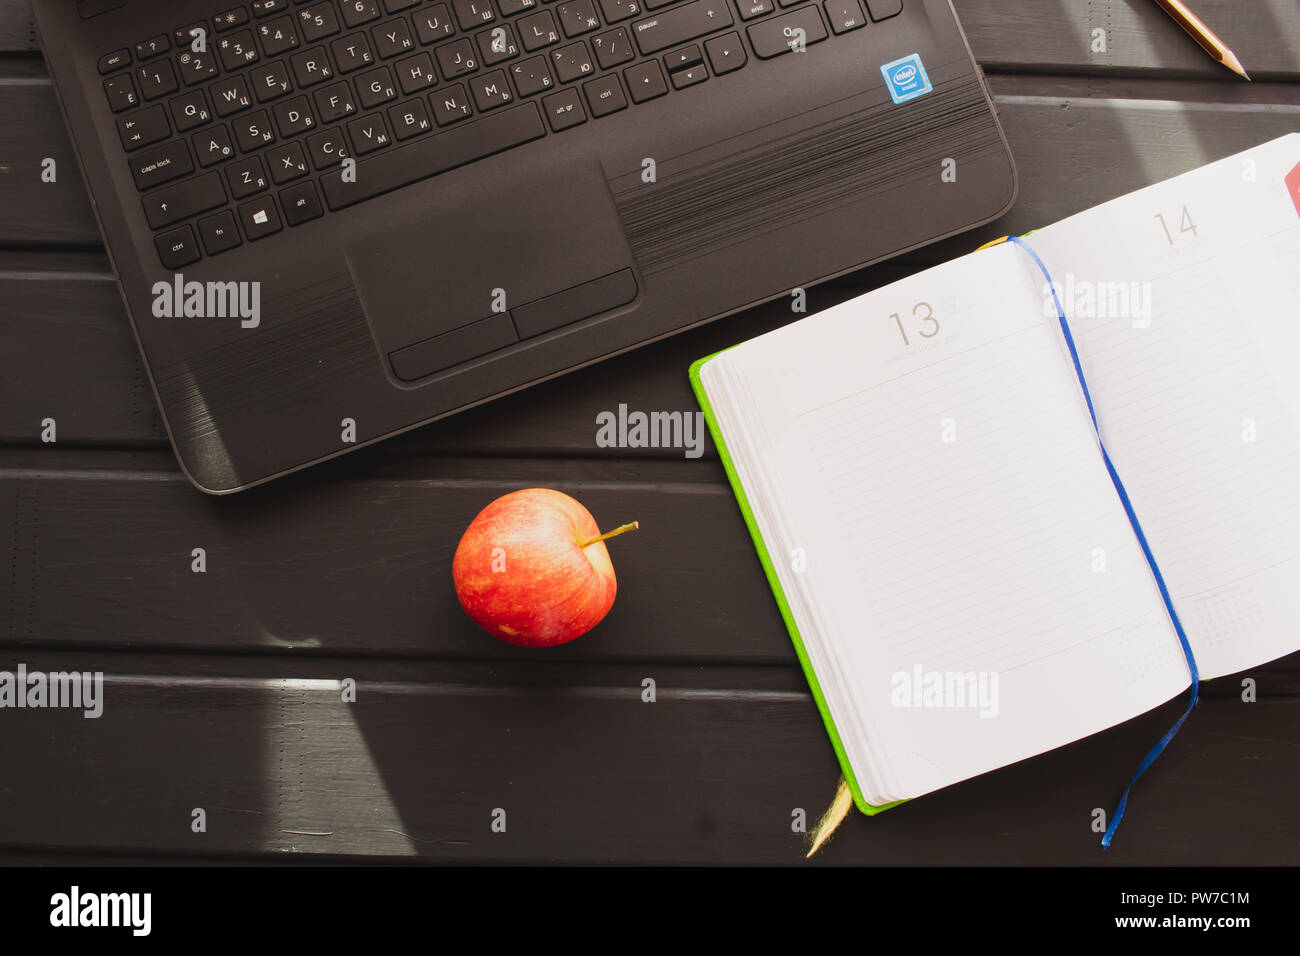 Working environment Netbook with a notebook are on the table. Next is a red apple Stock Photo